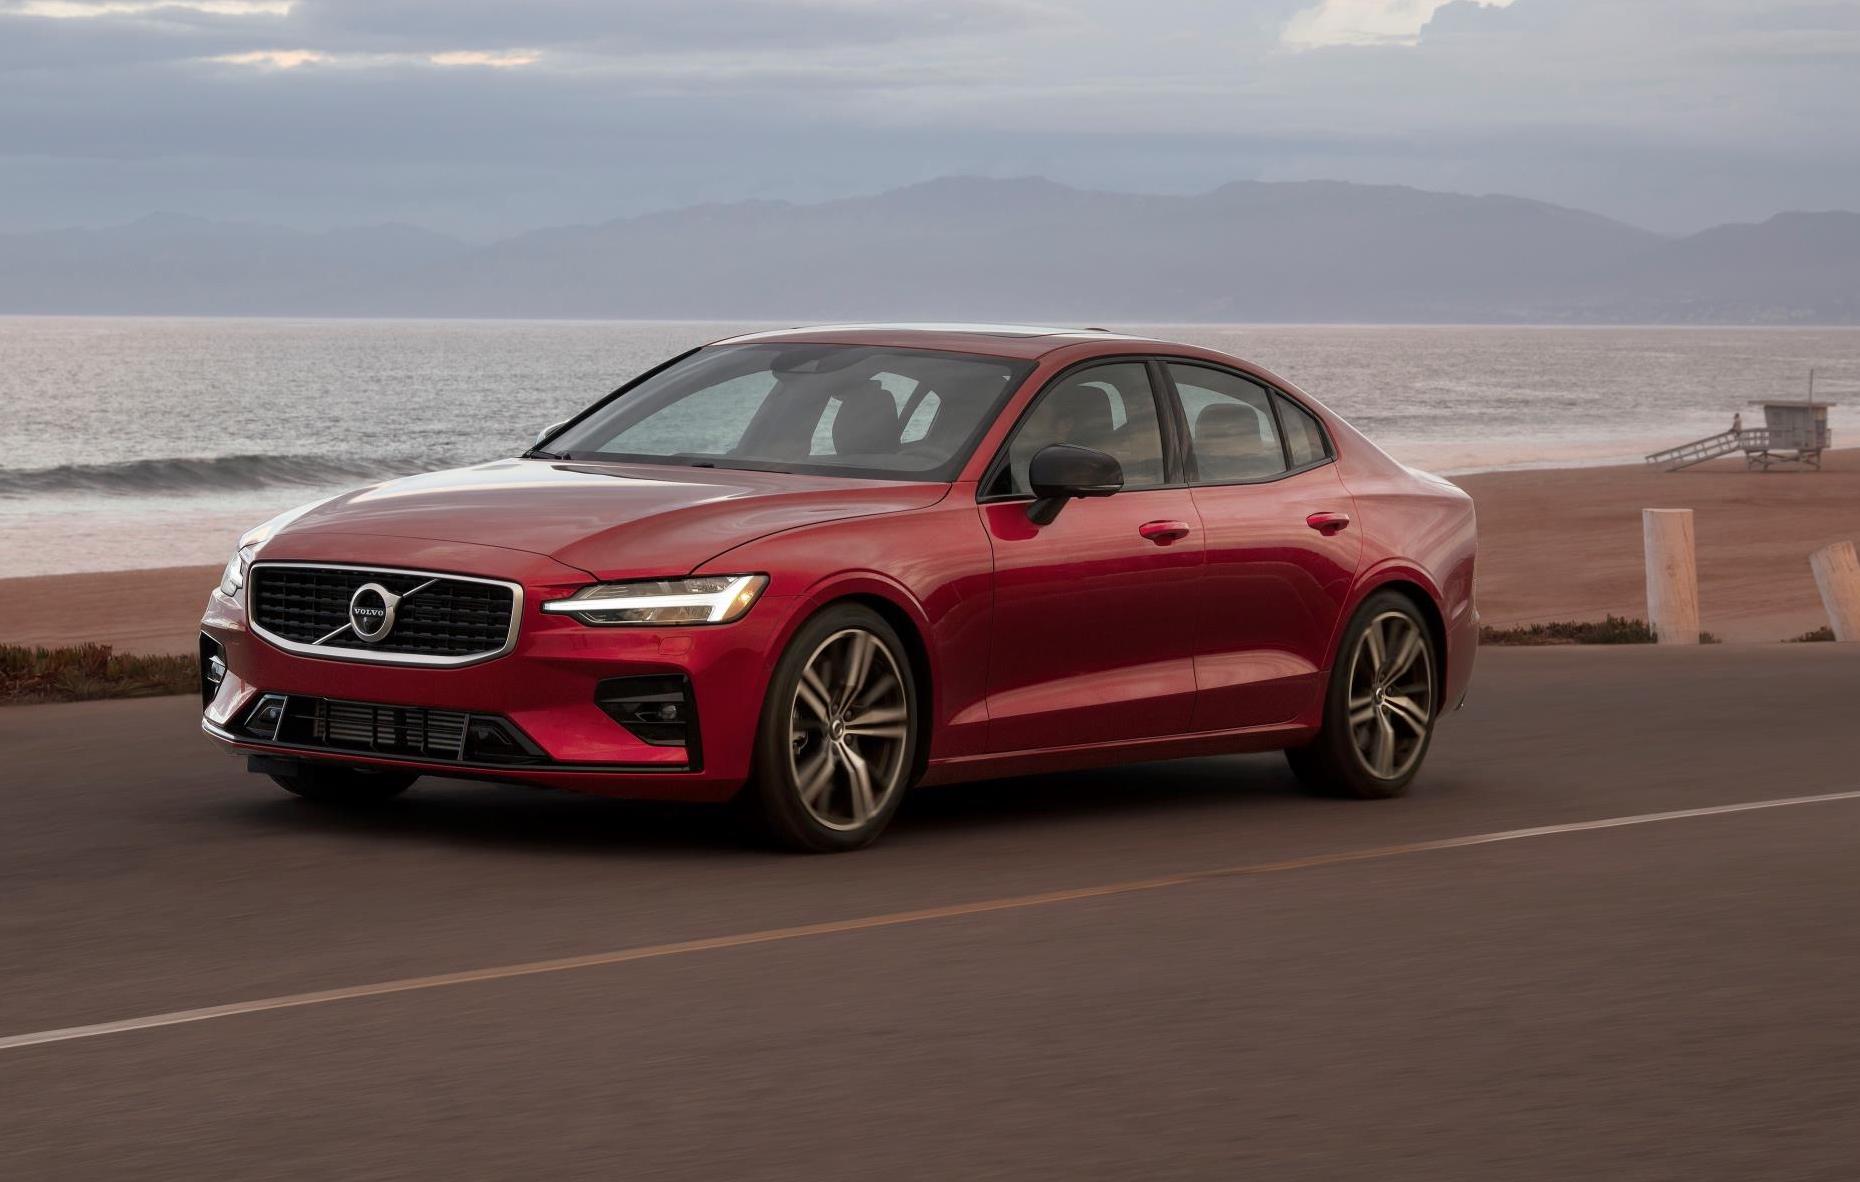 Volvo cars to feature 180km/h speed limit from 2020